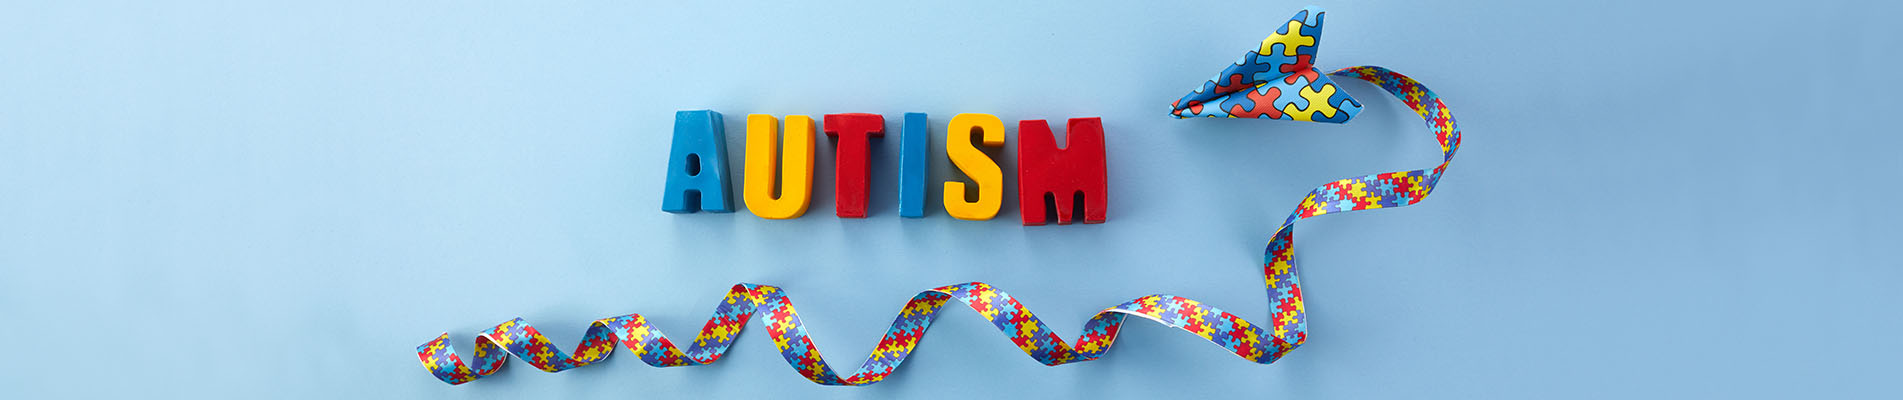 Cannabis for Autism - Is It Effective?